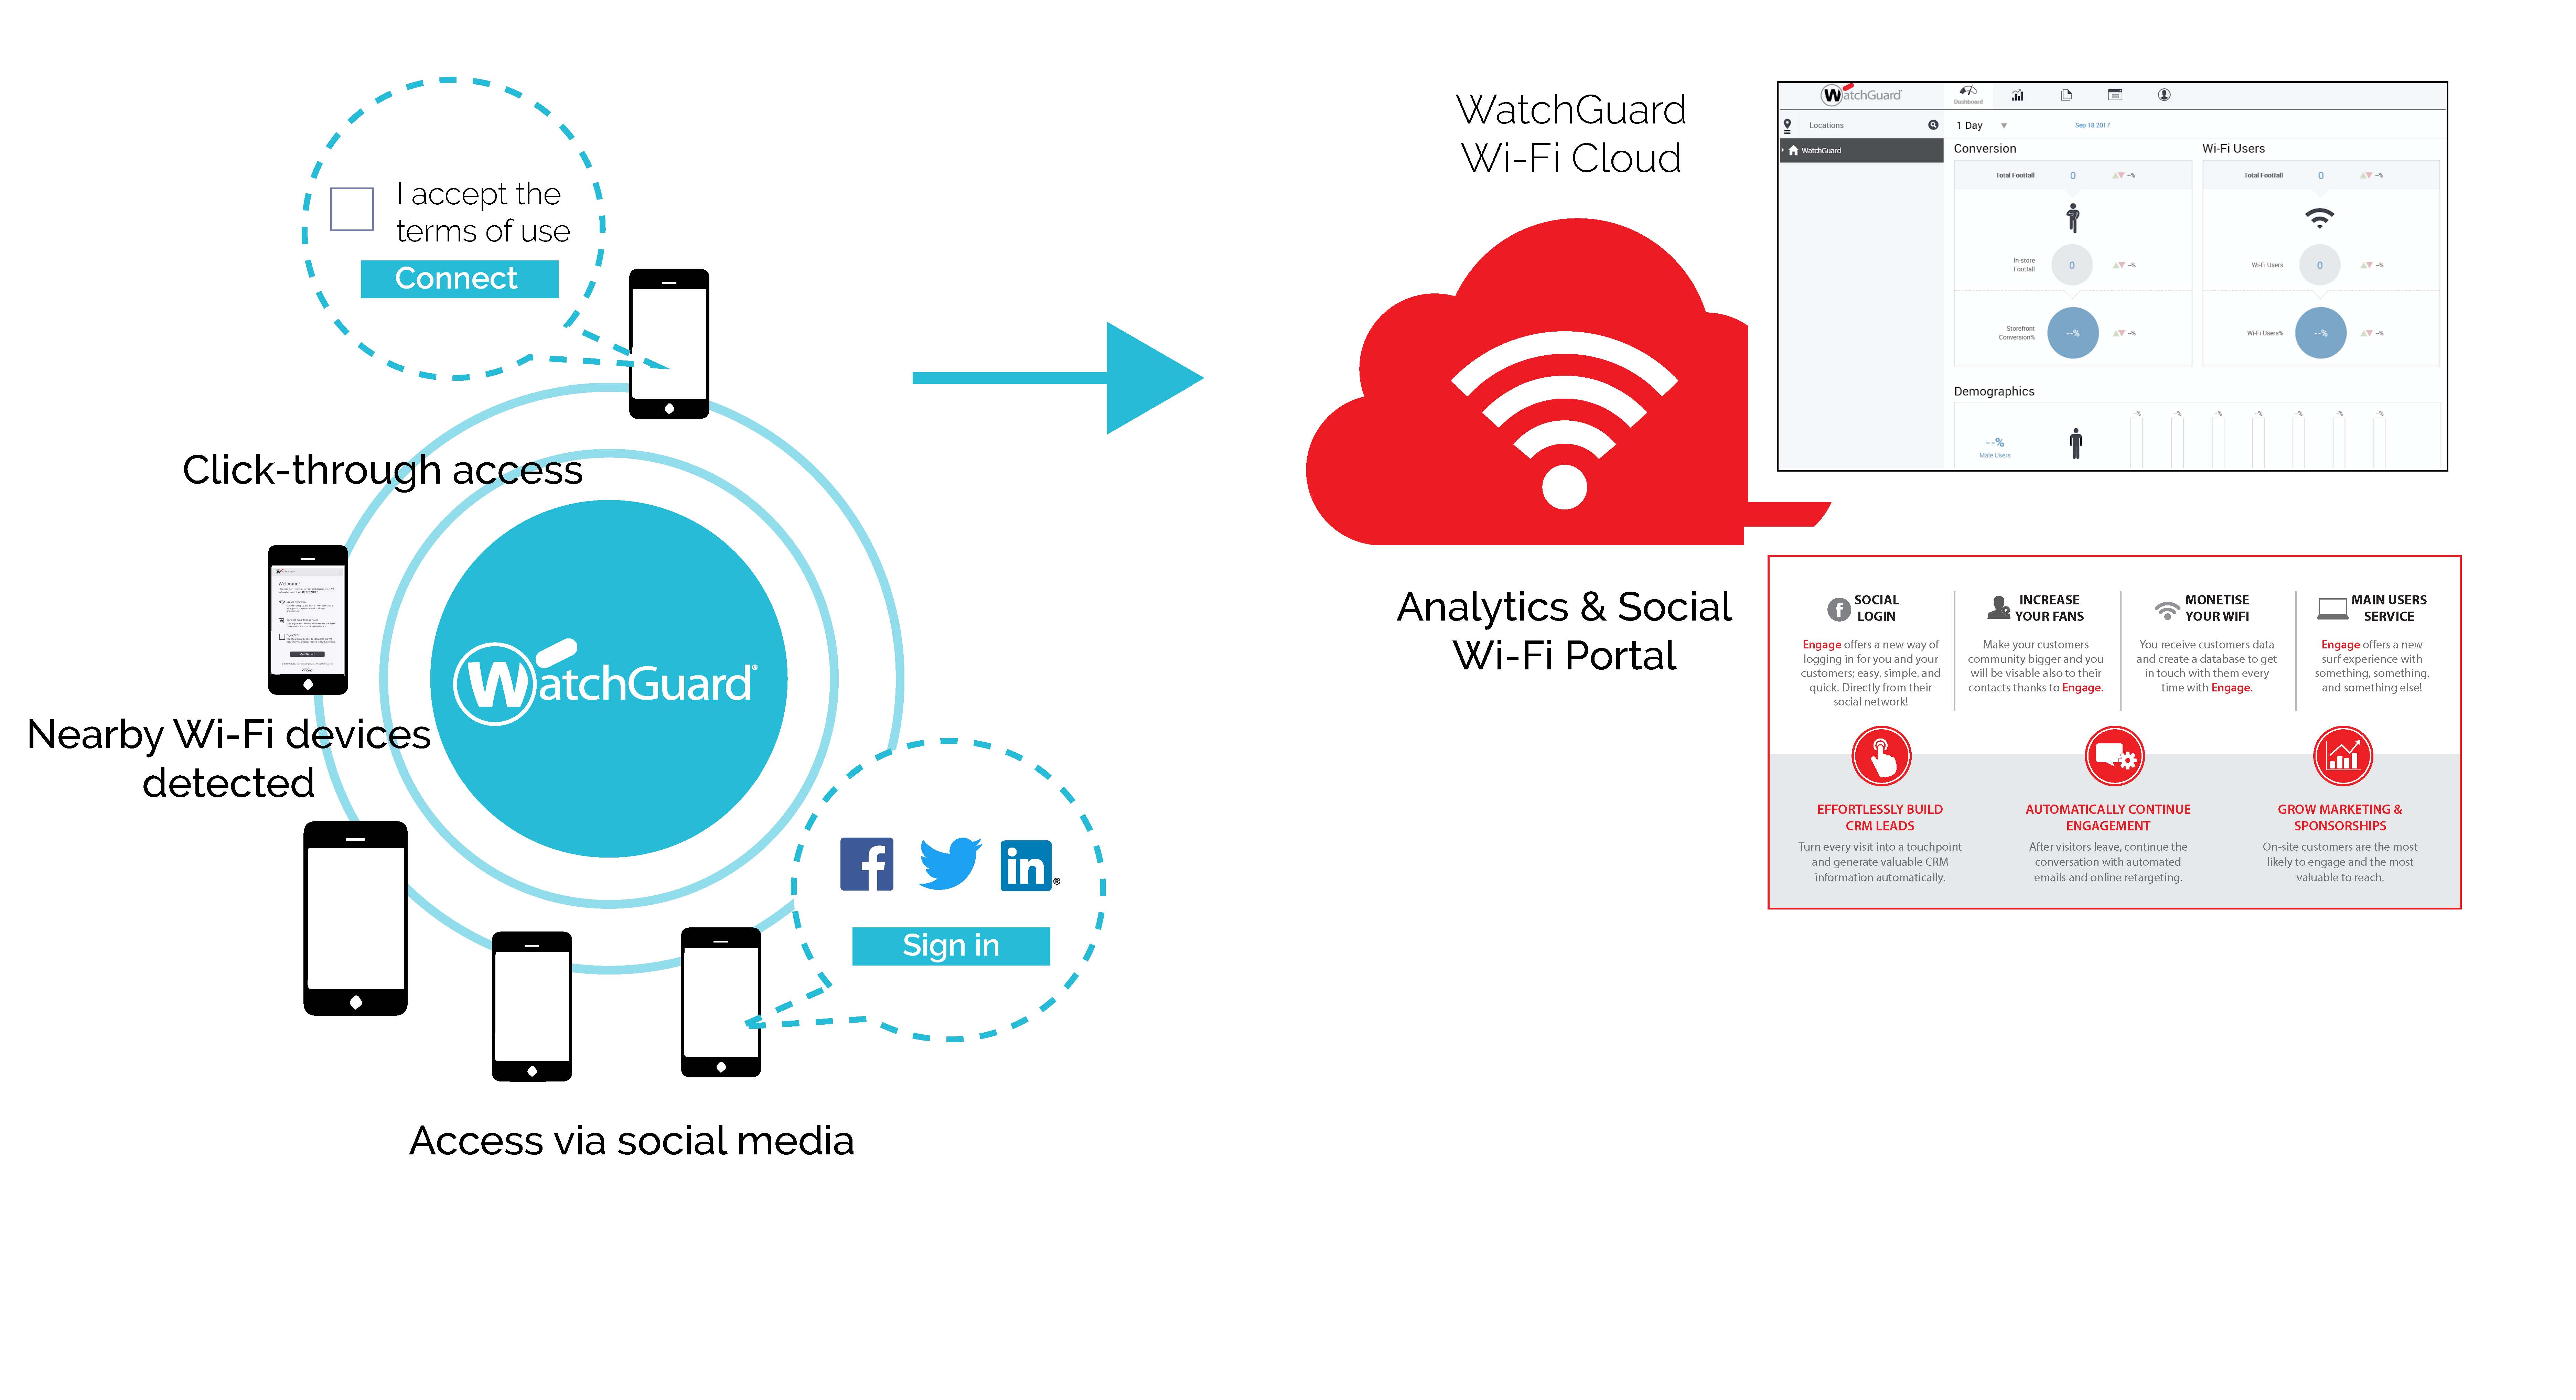 Diagram of social media interaction with Wi-Fi Cloud